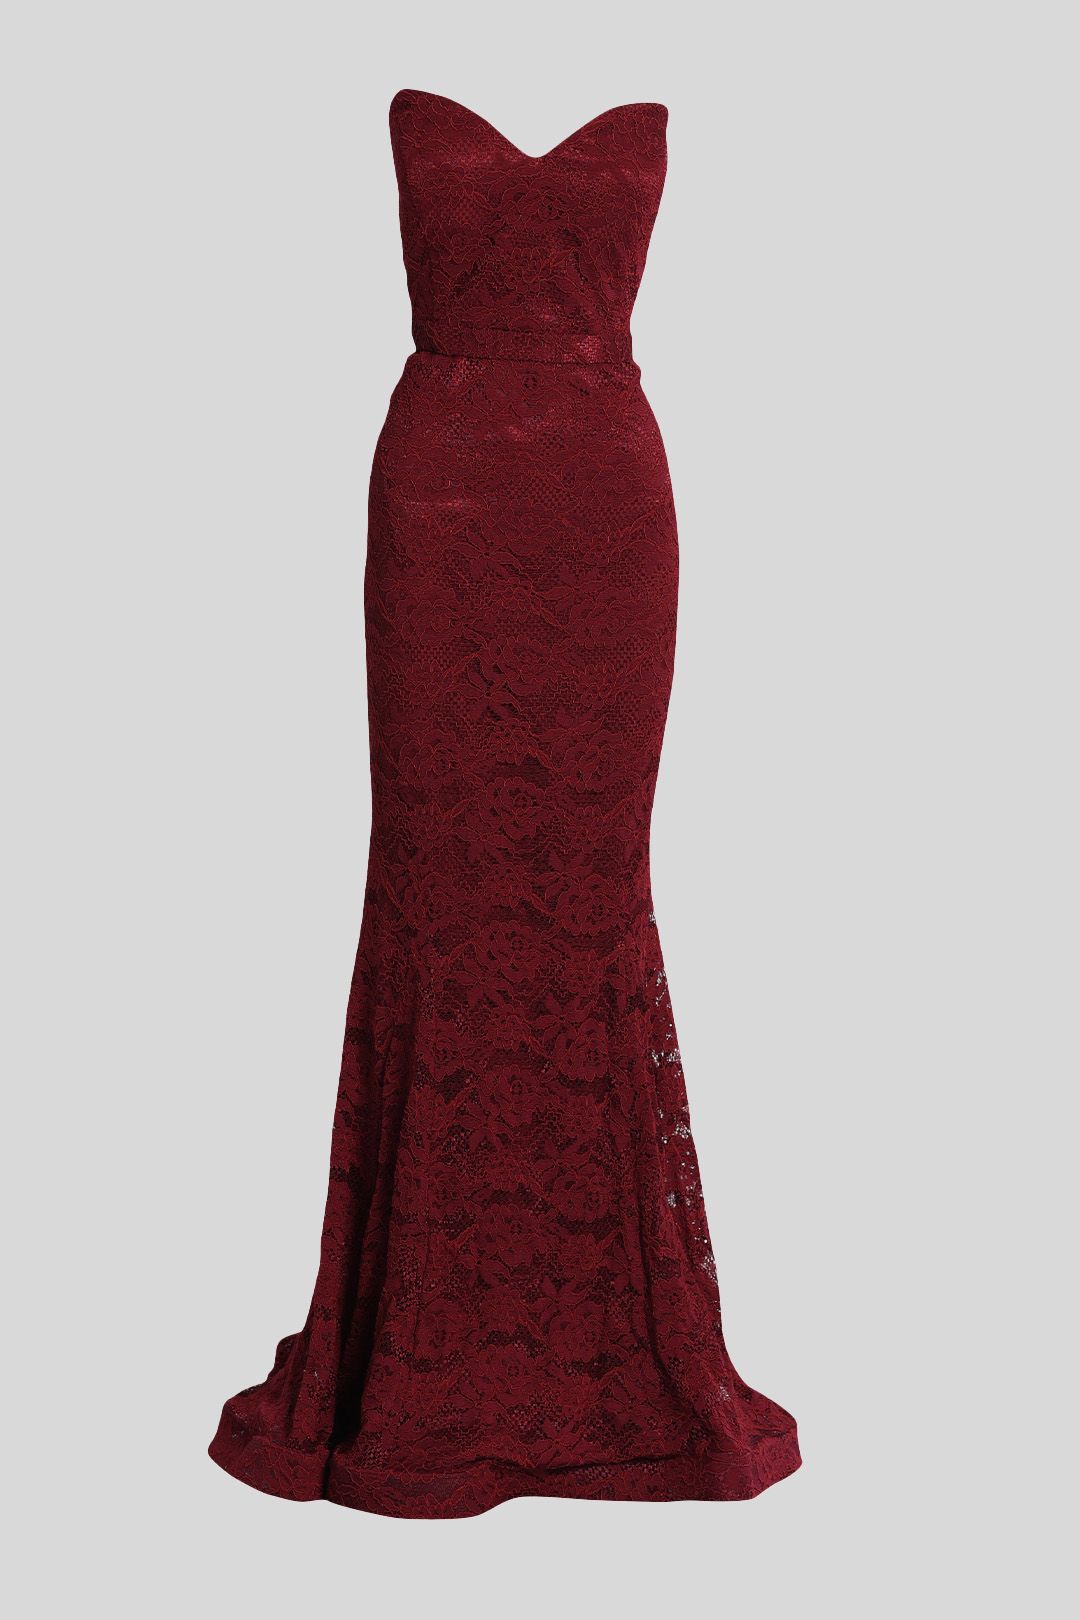 Jadore Strapless Lace Evening Gown in Maroon